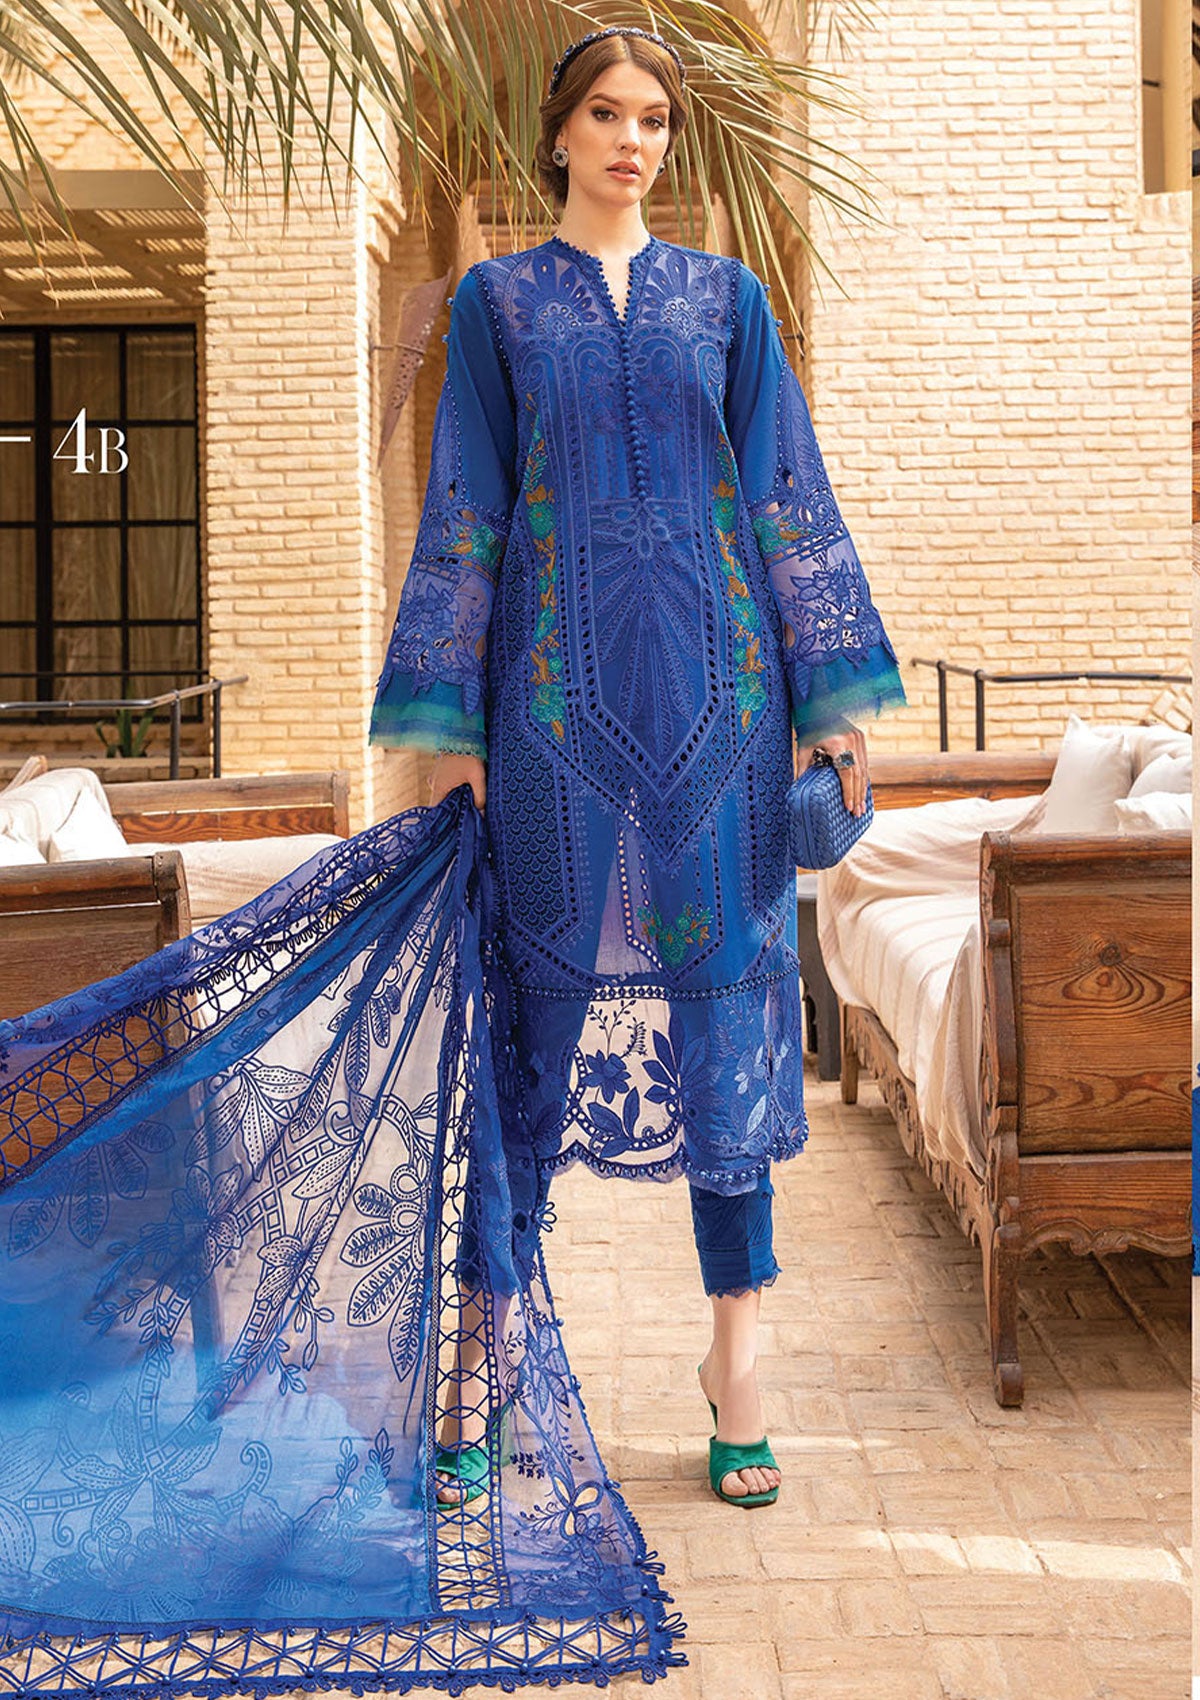 Lawn Collection - Maria B - Voyage a'Luxe - Luxury - MB24#04B